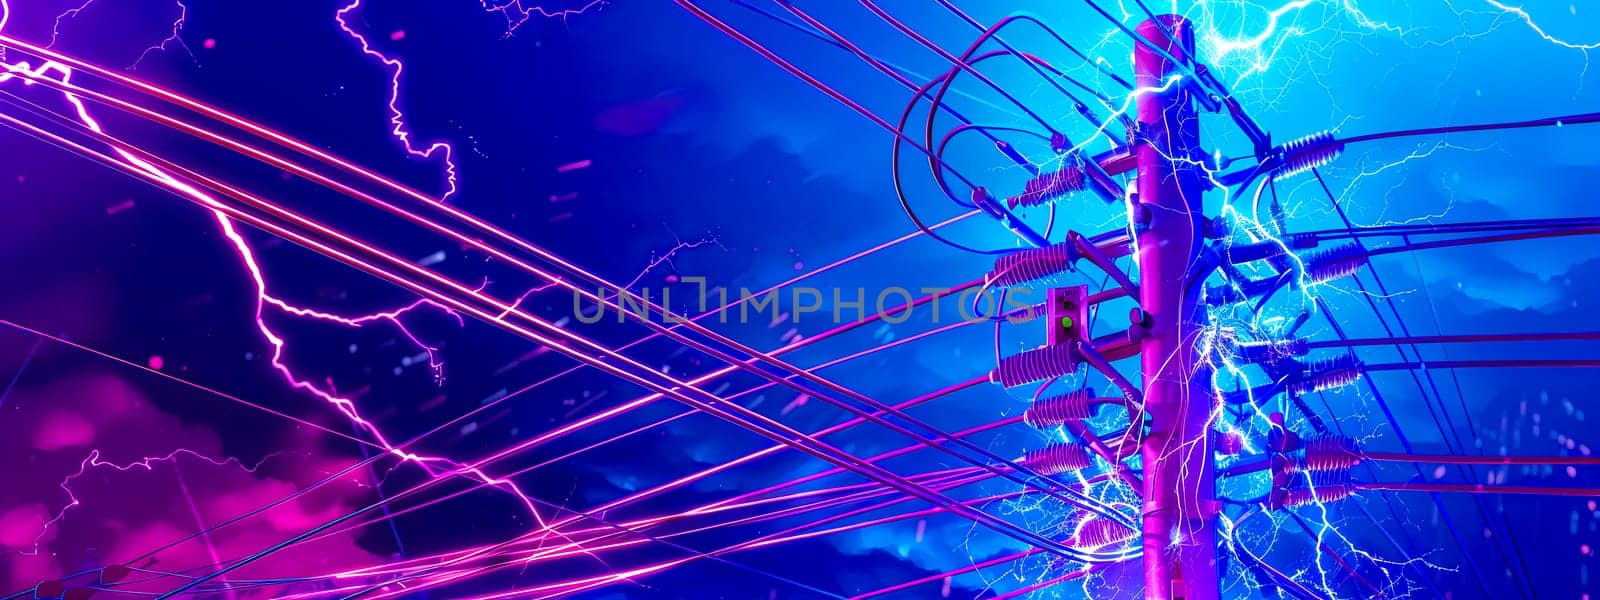 A vibrant purple lightning bolt is striking from the power line, illuminating the sky with its electric blue hue